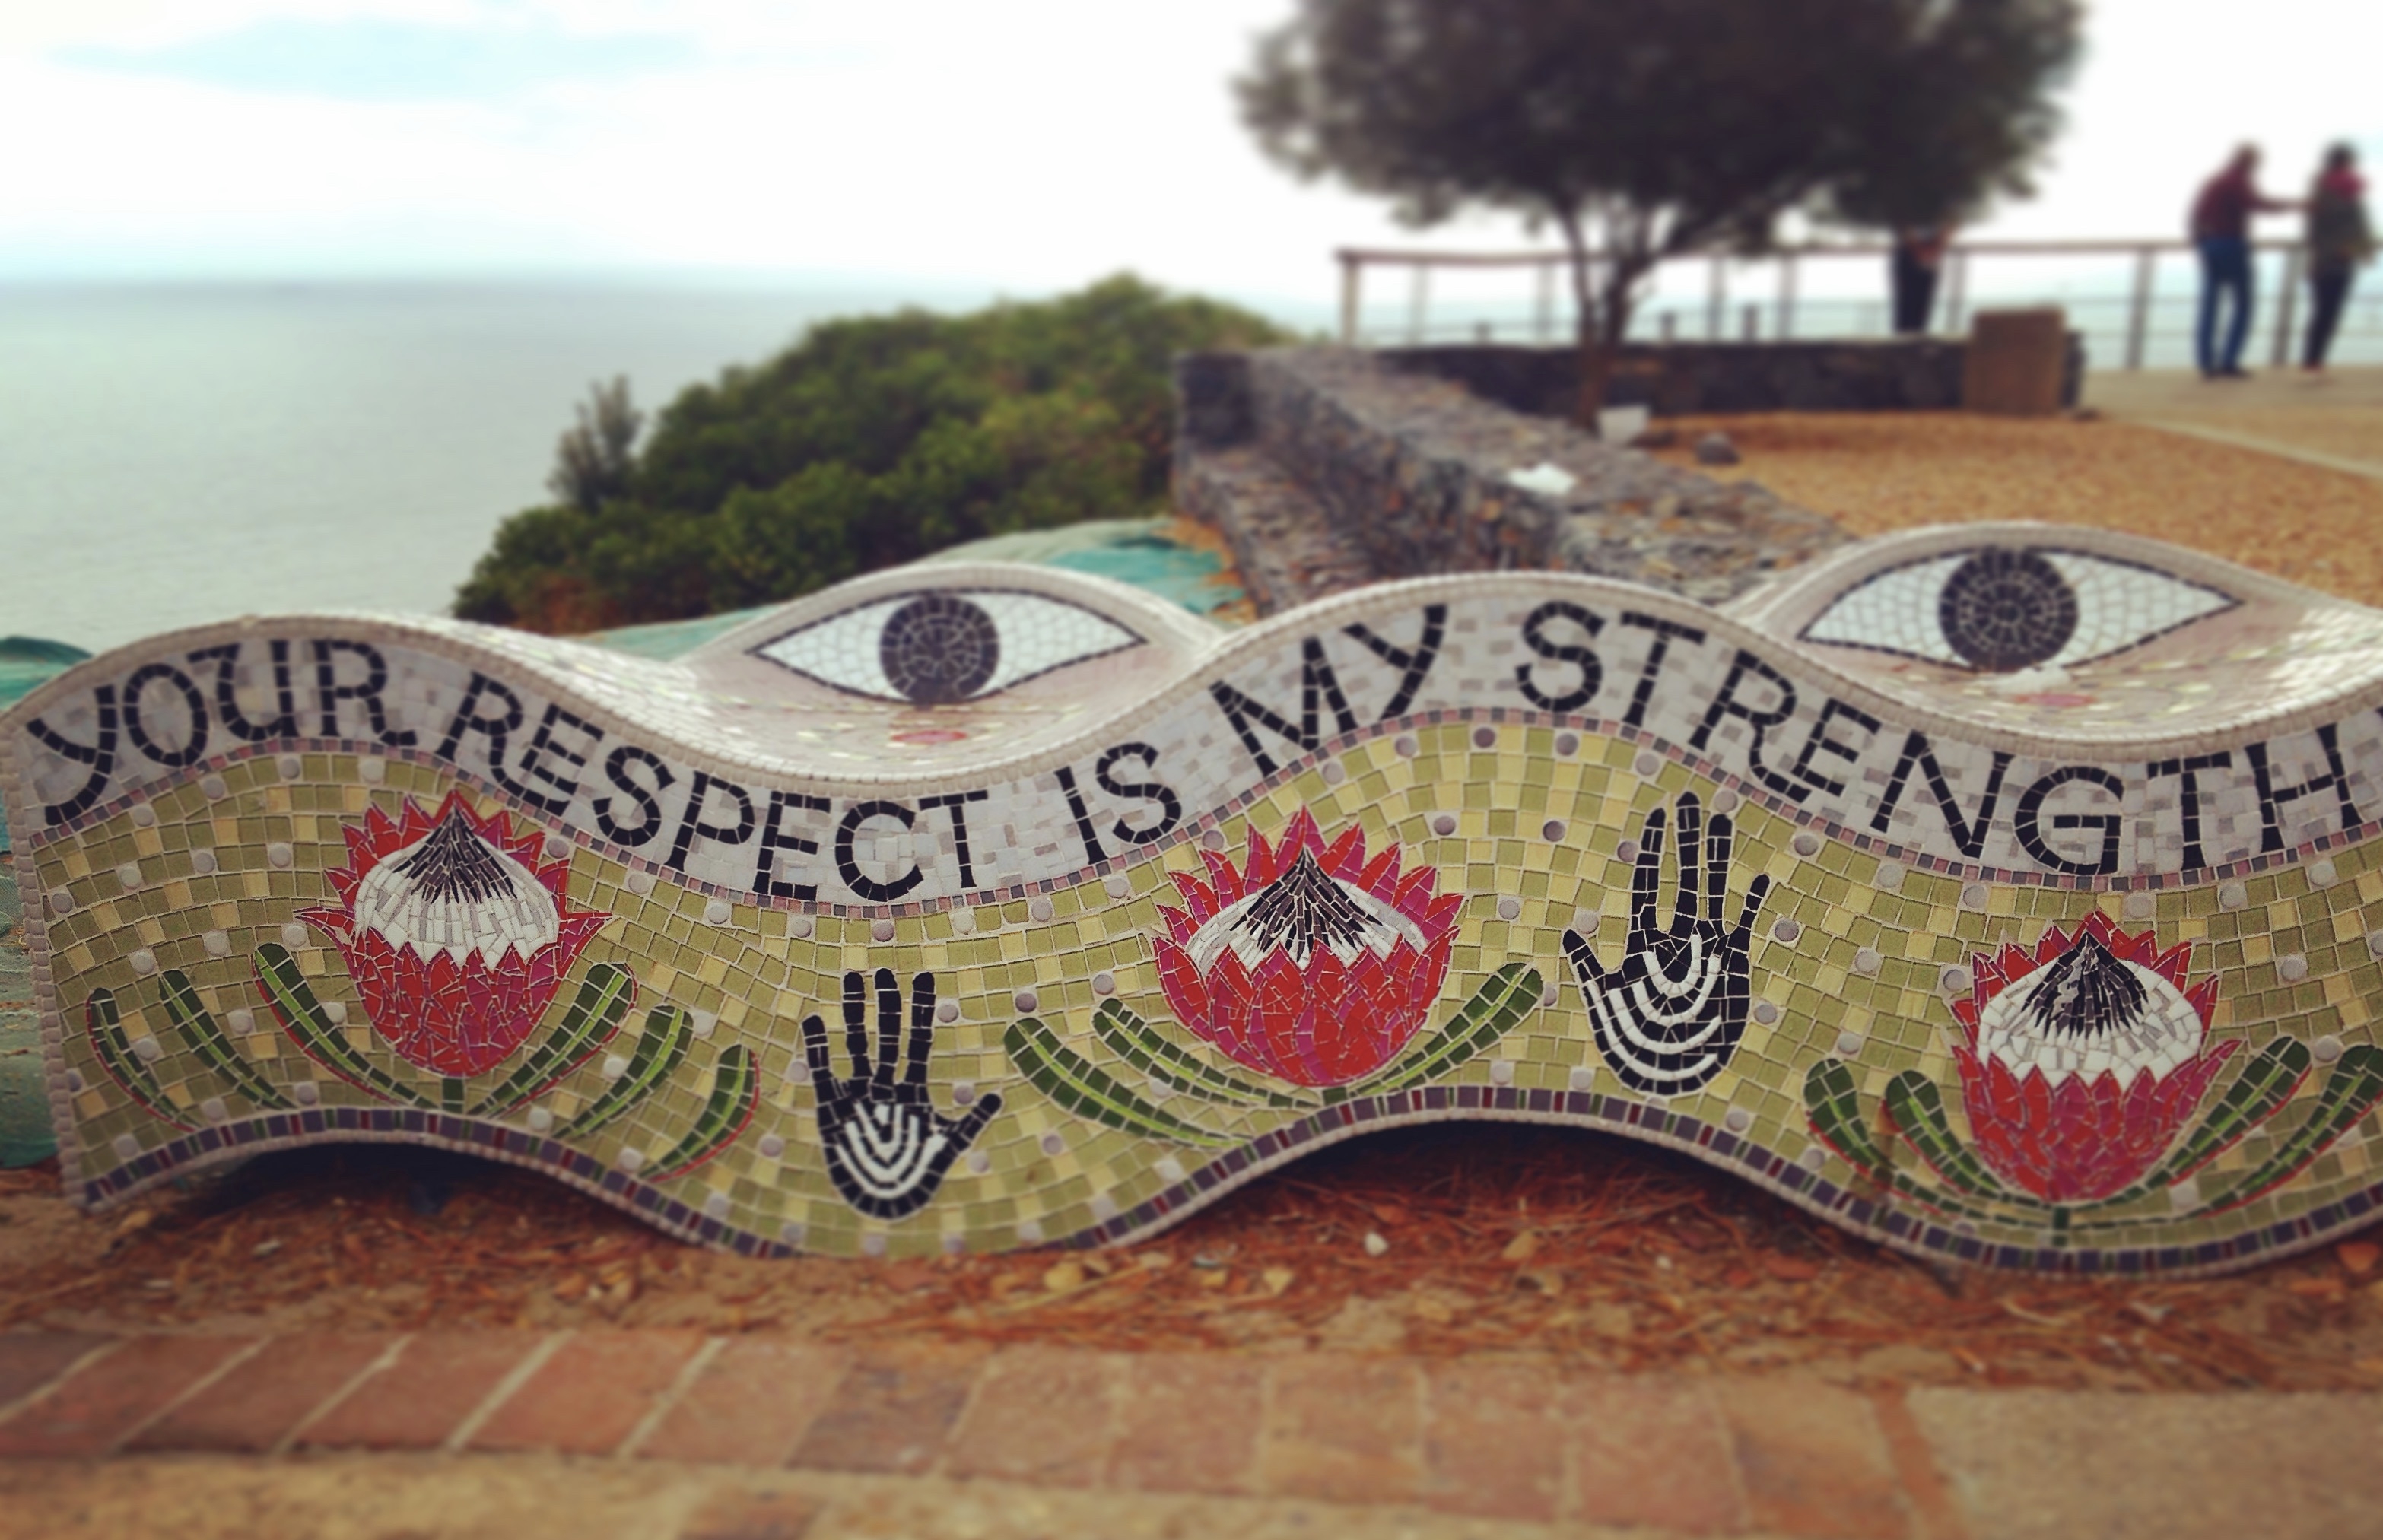 sculpture at top of signal hill that reads "your respect is my strength"